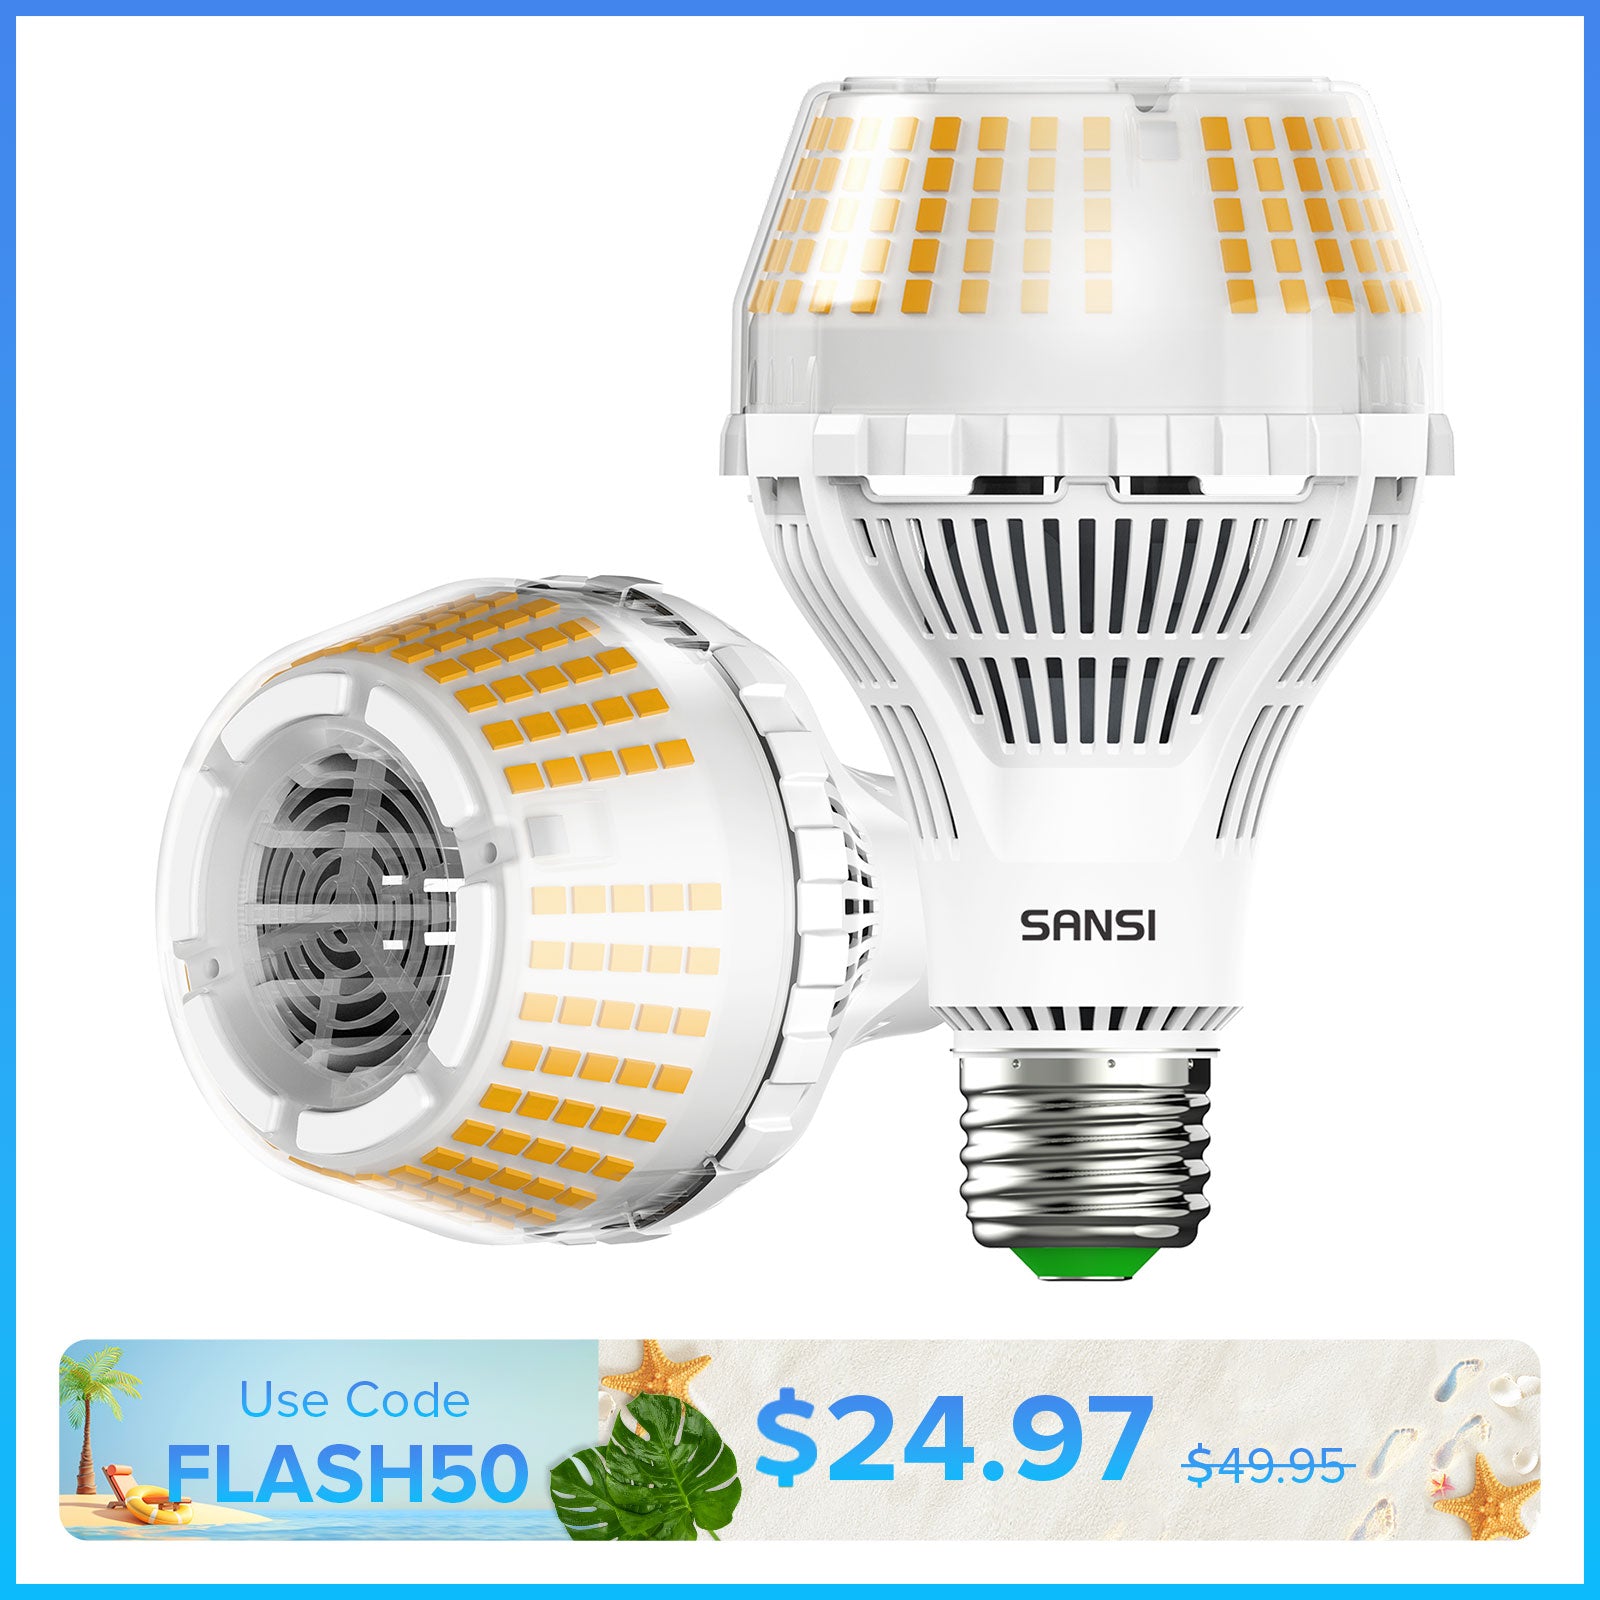 Upgraded (Non-)Dimmable A21 27W LED 3000K Light Bulb(US ONLY)